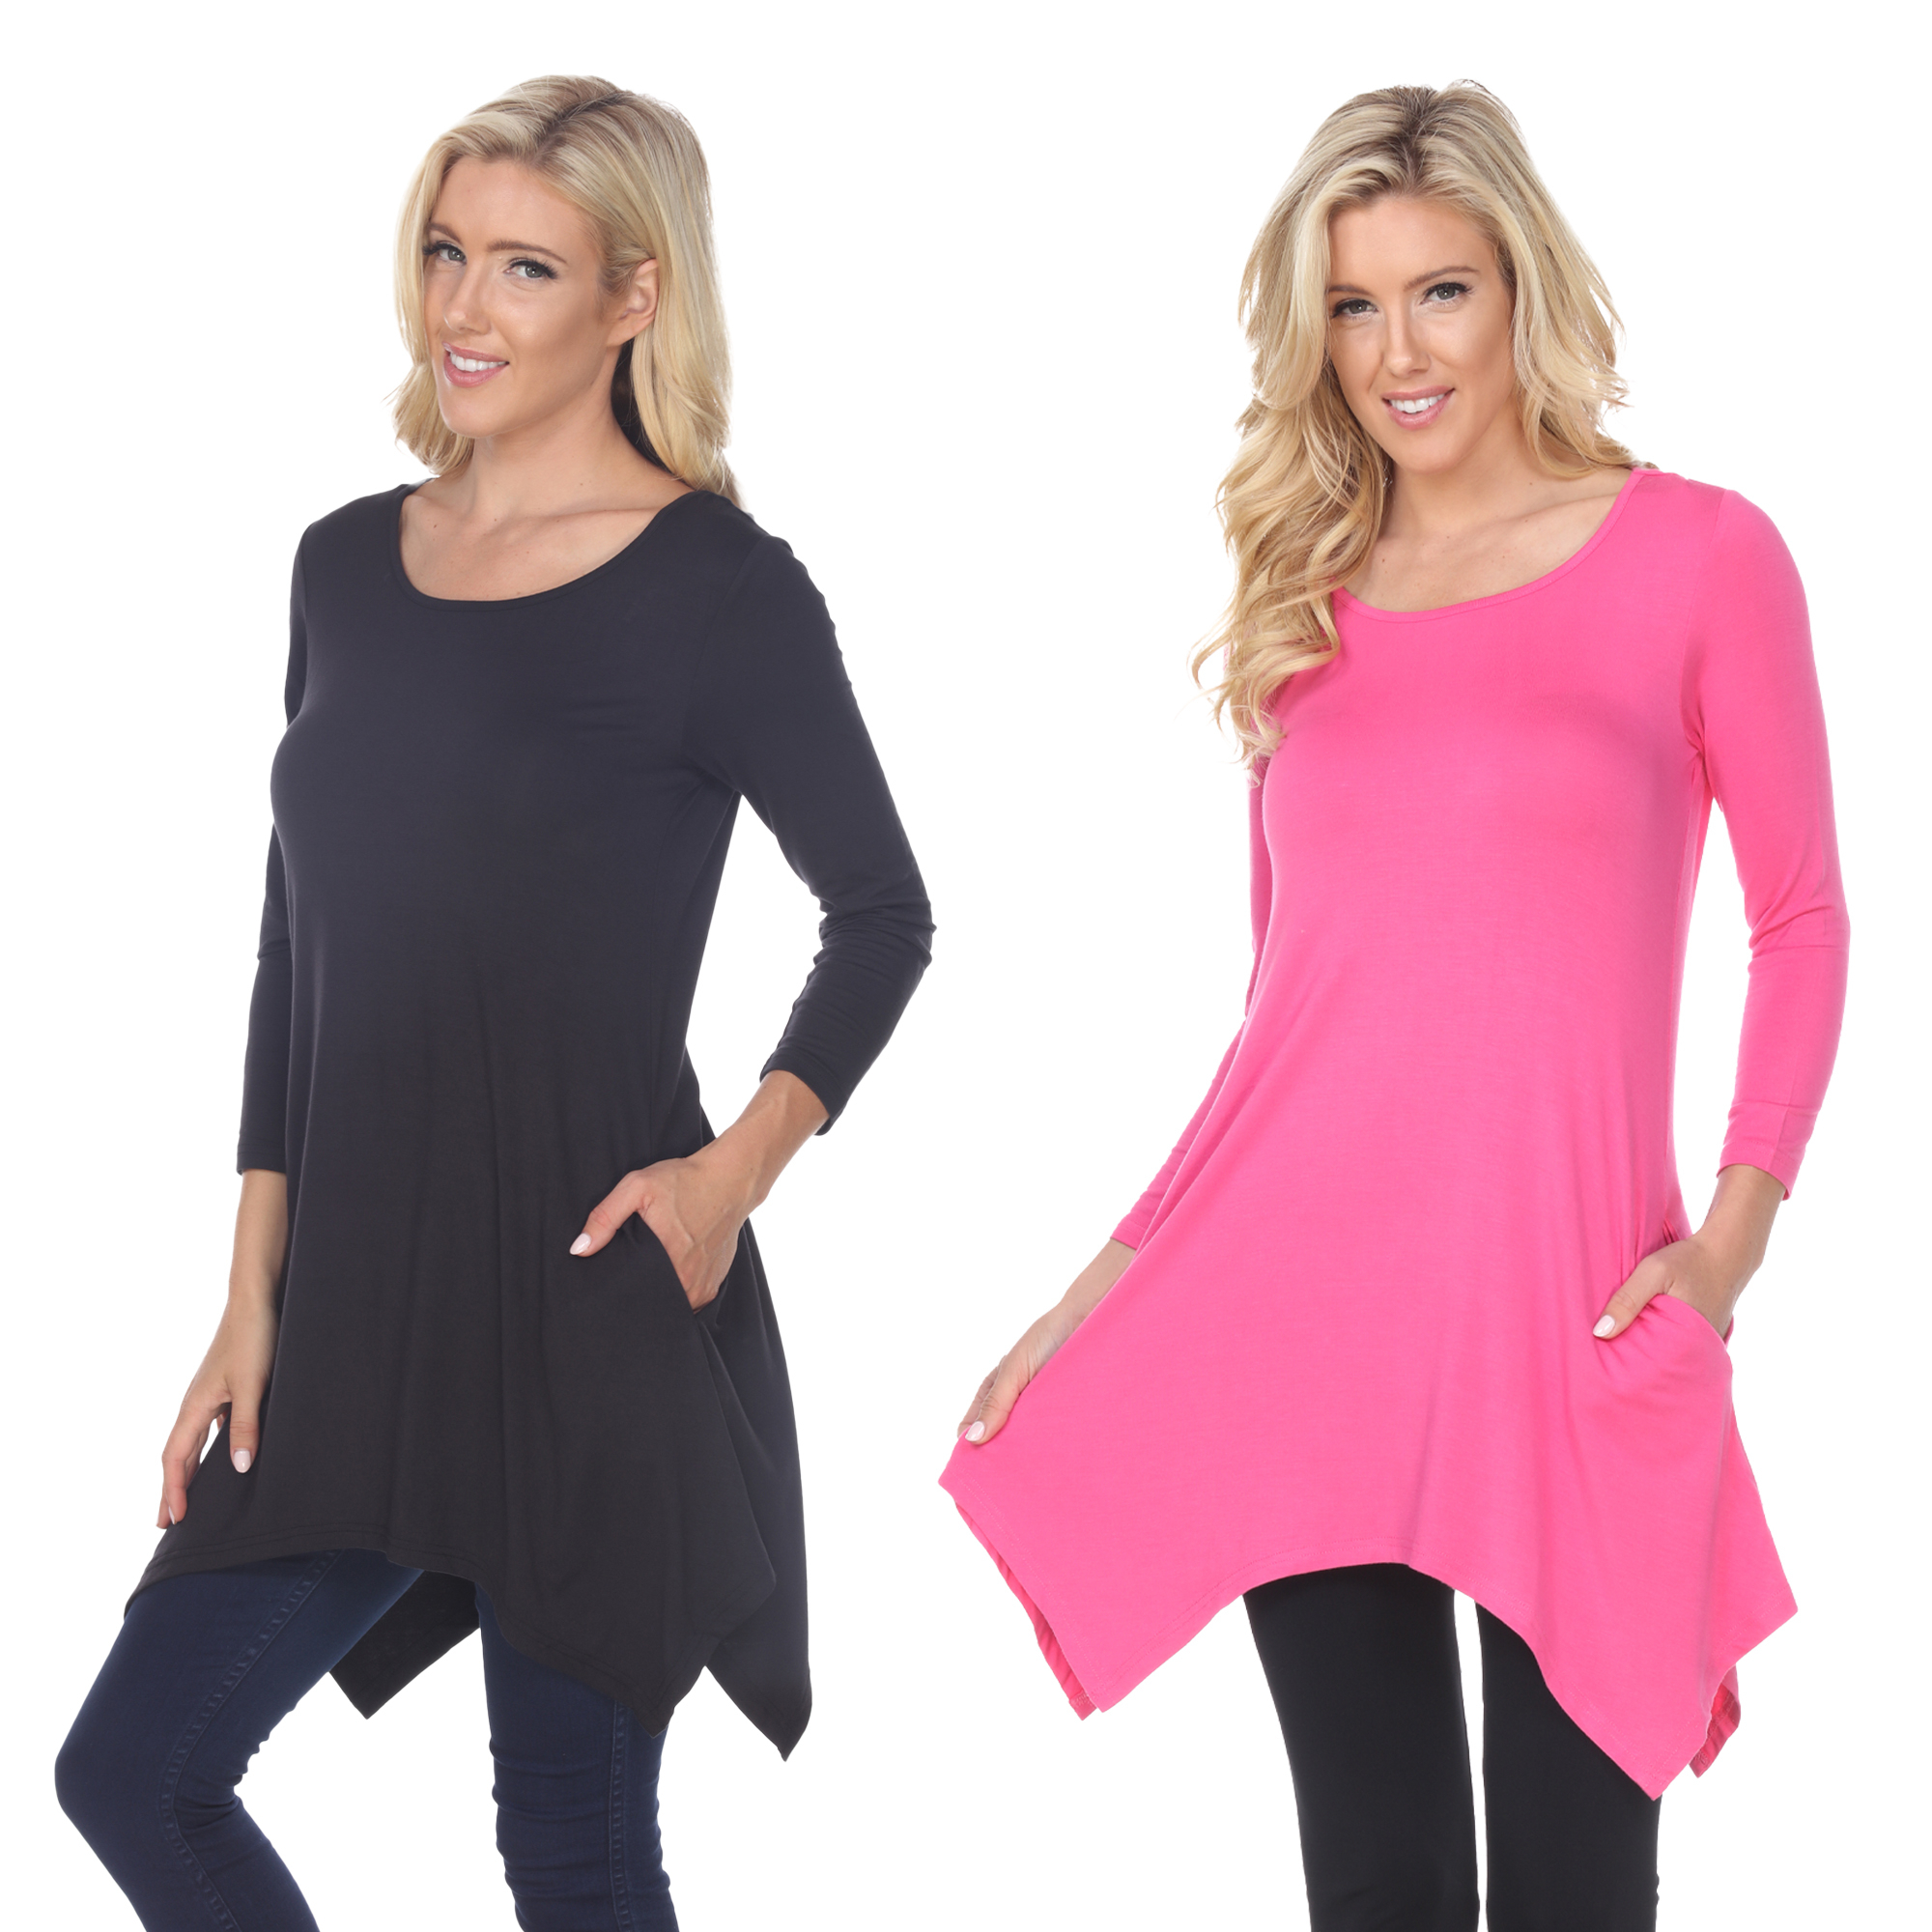 White Mark Women's Pack Of 2 Black Tunic Top - Black, Red, X-Large